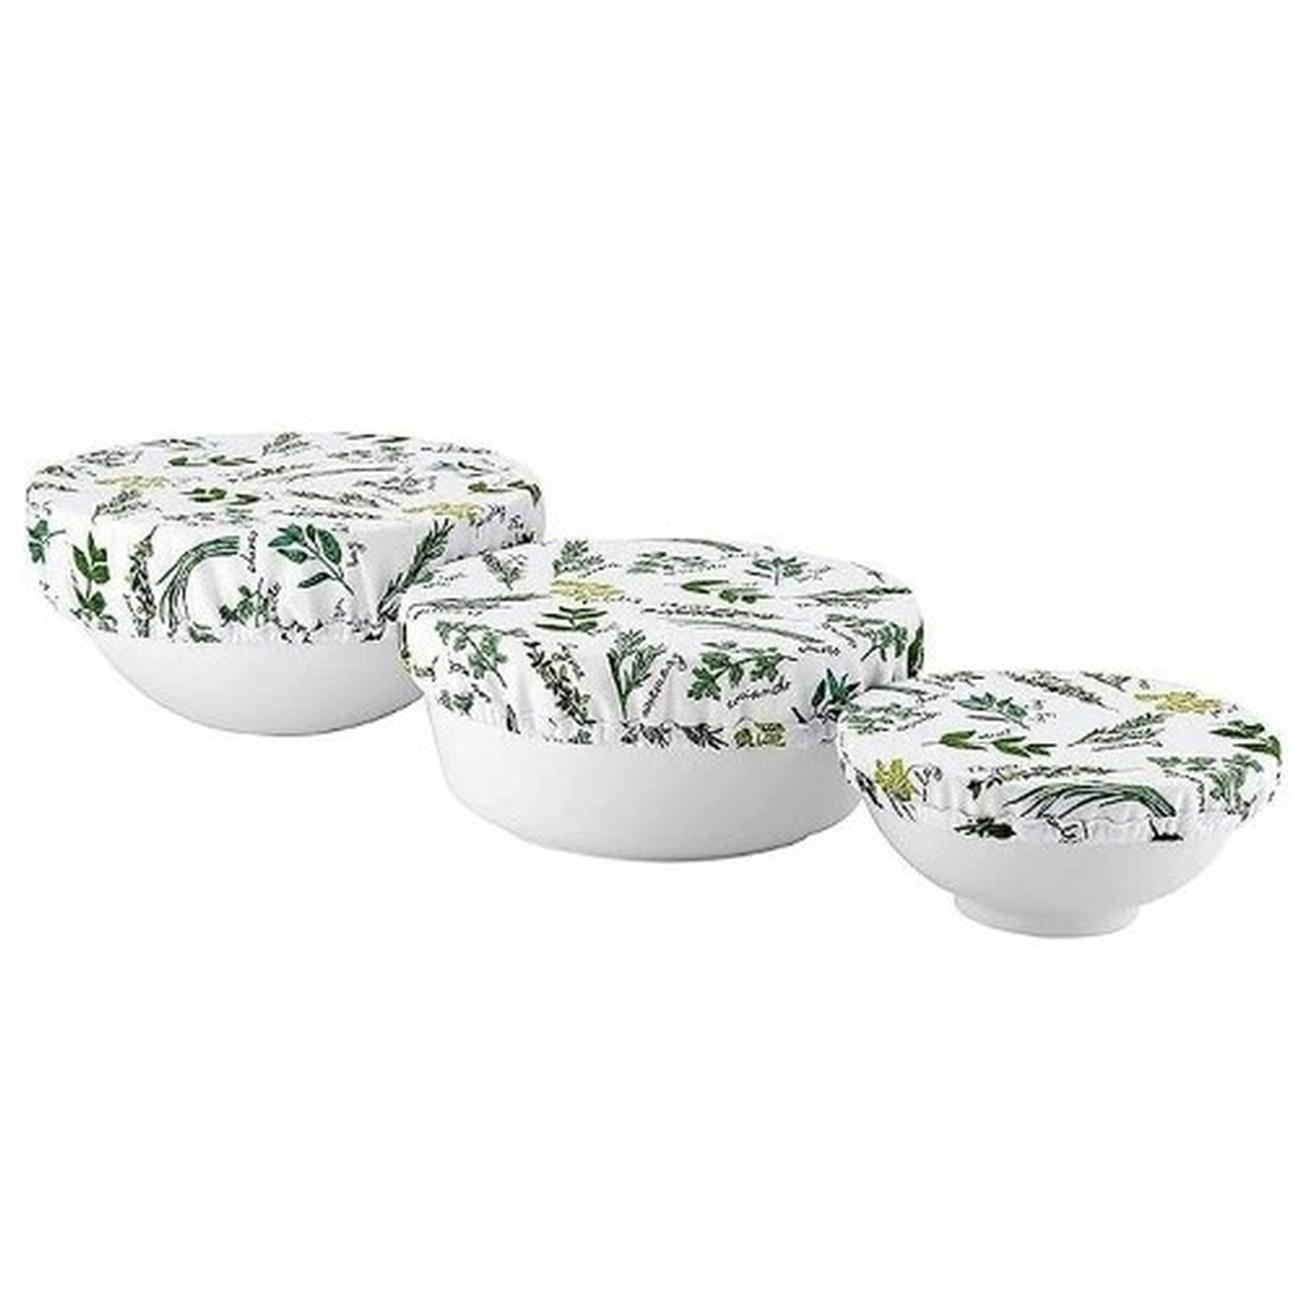 https://www.thekitchenwhisk.ie/contentfiles/productImages/Large/1687955449380_ladelle-cotton-reusable-stretch-bowl-covers-setof3-herbology-1.jpg